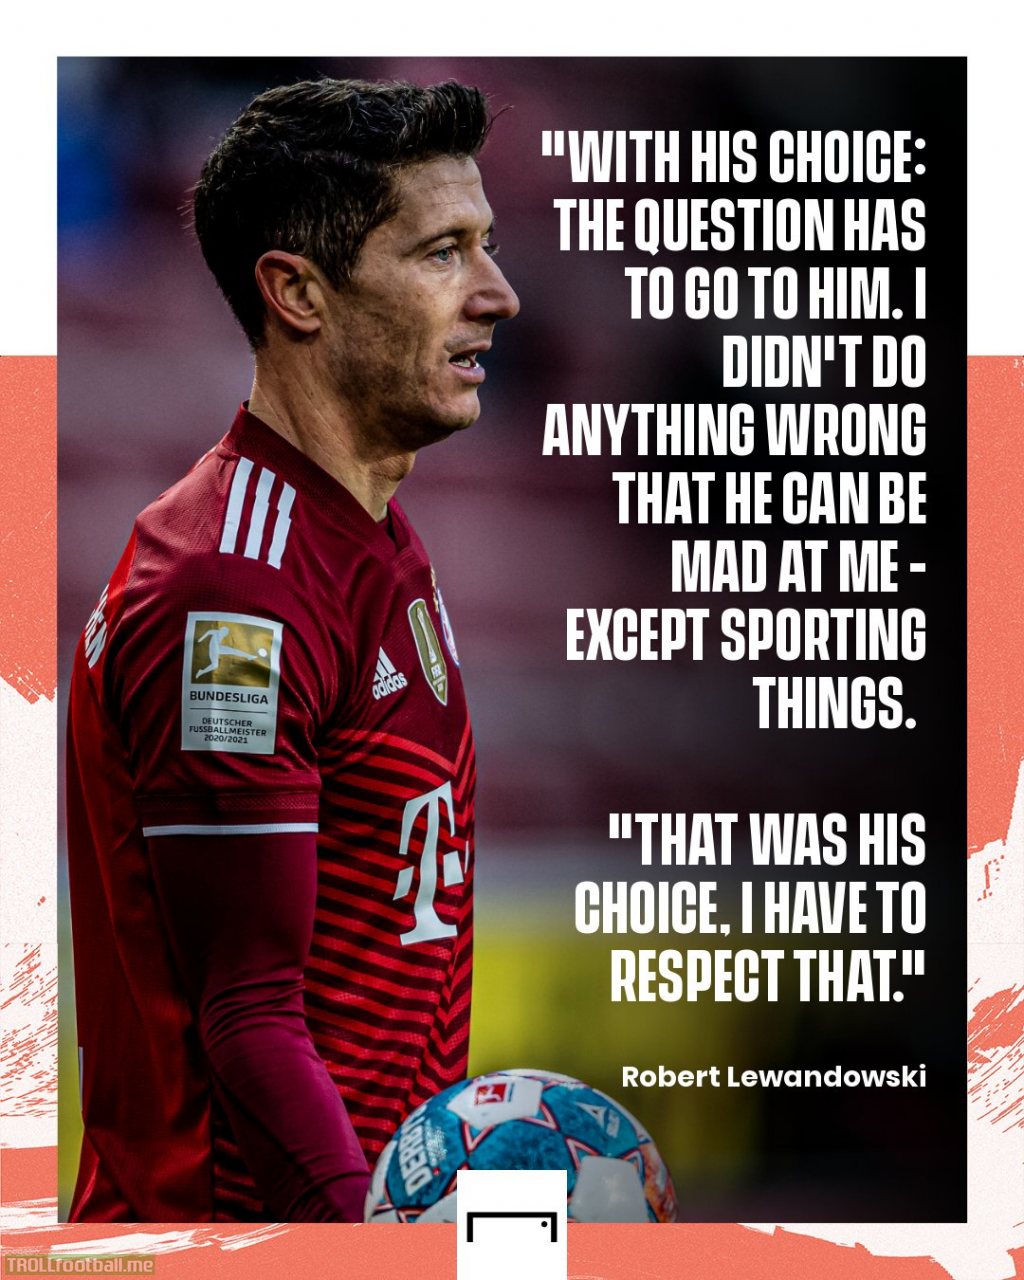 Robert Lewandowski speaks on Lionel Messi leaving him out of his top three in The Best Men's Player voting 🗣